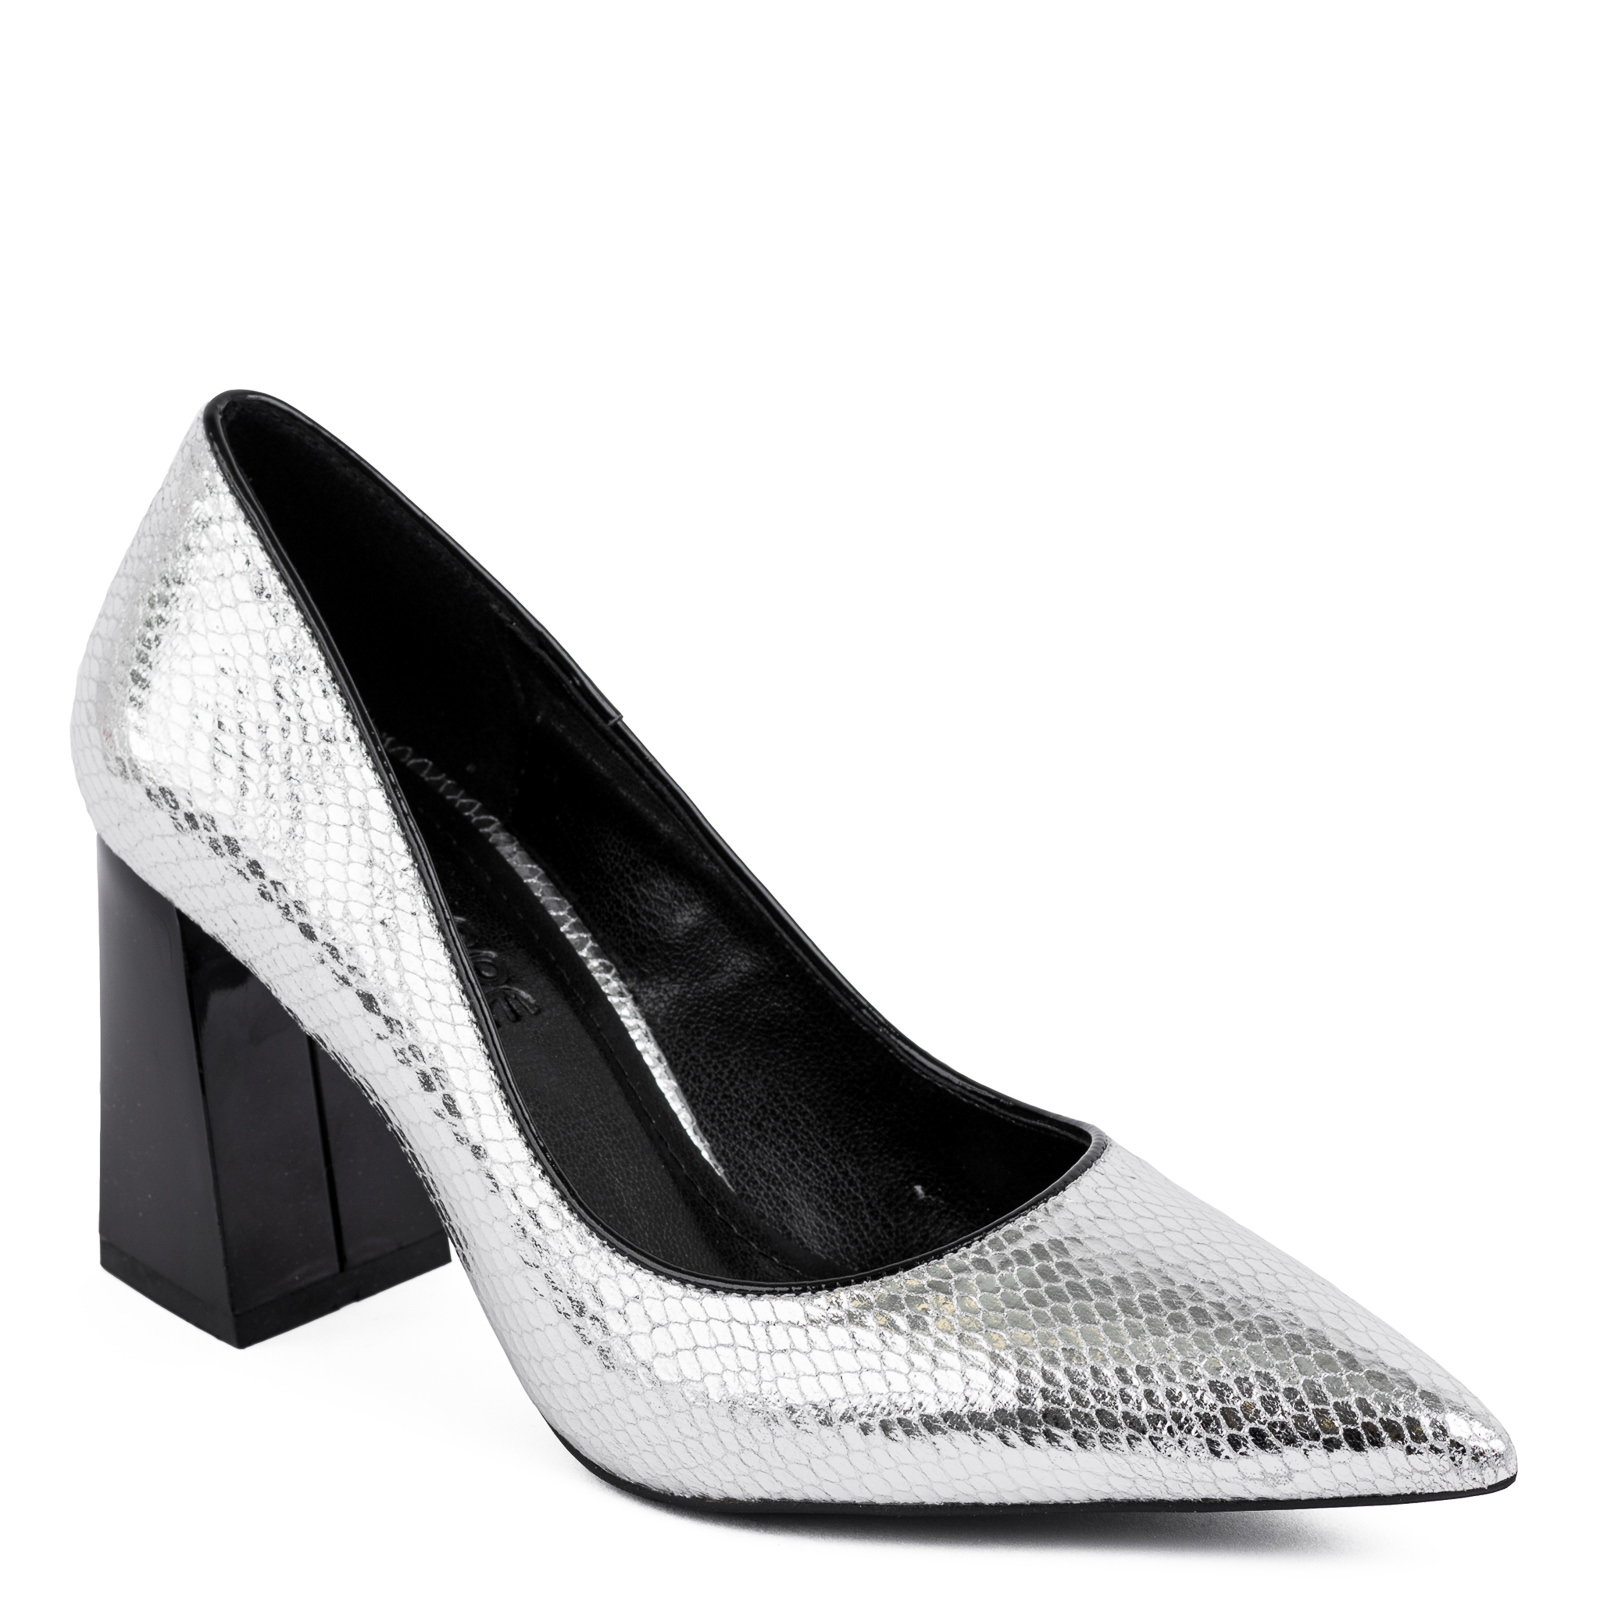 SNAKE POINTED STILETTO SHOES WITH BLOCK HEEL - SILVER